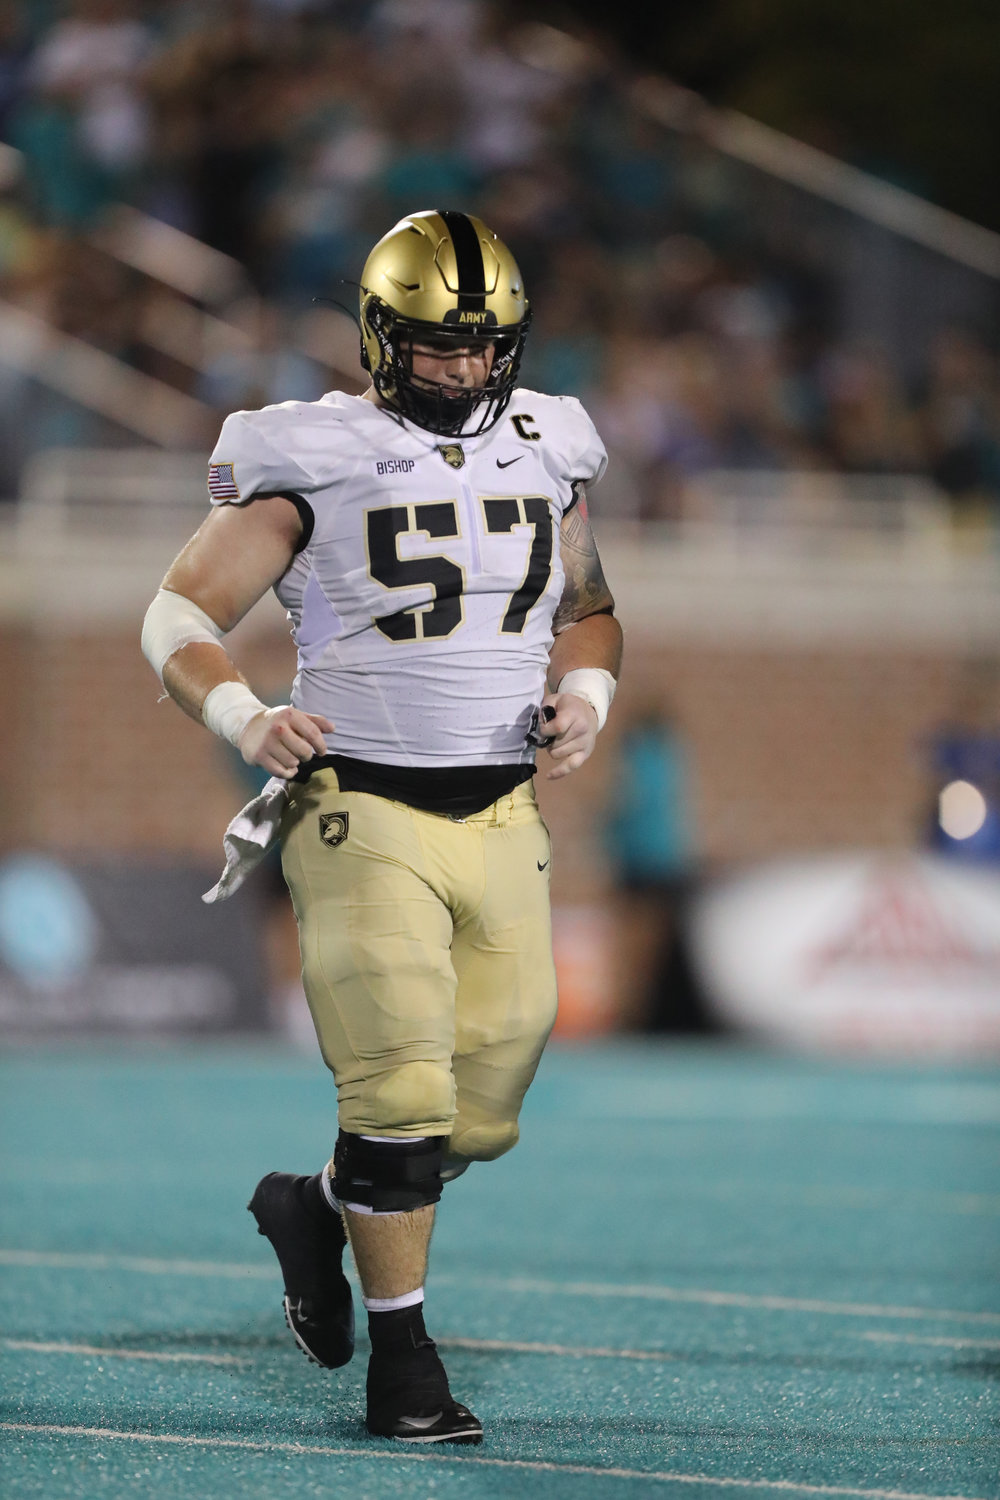 Army senior co-captain Connor Bishop, an Archbishop Wood graduate, was put on the Outland Trophy Watch List in June, an award given to the best offensive lineman in college football.